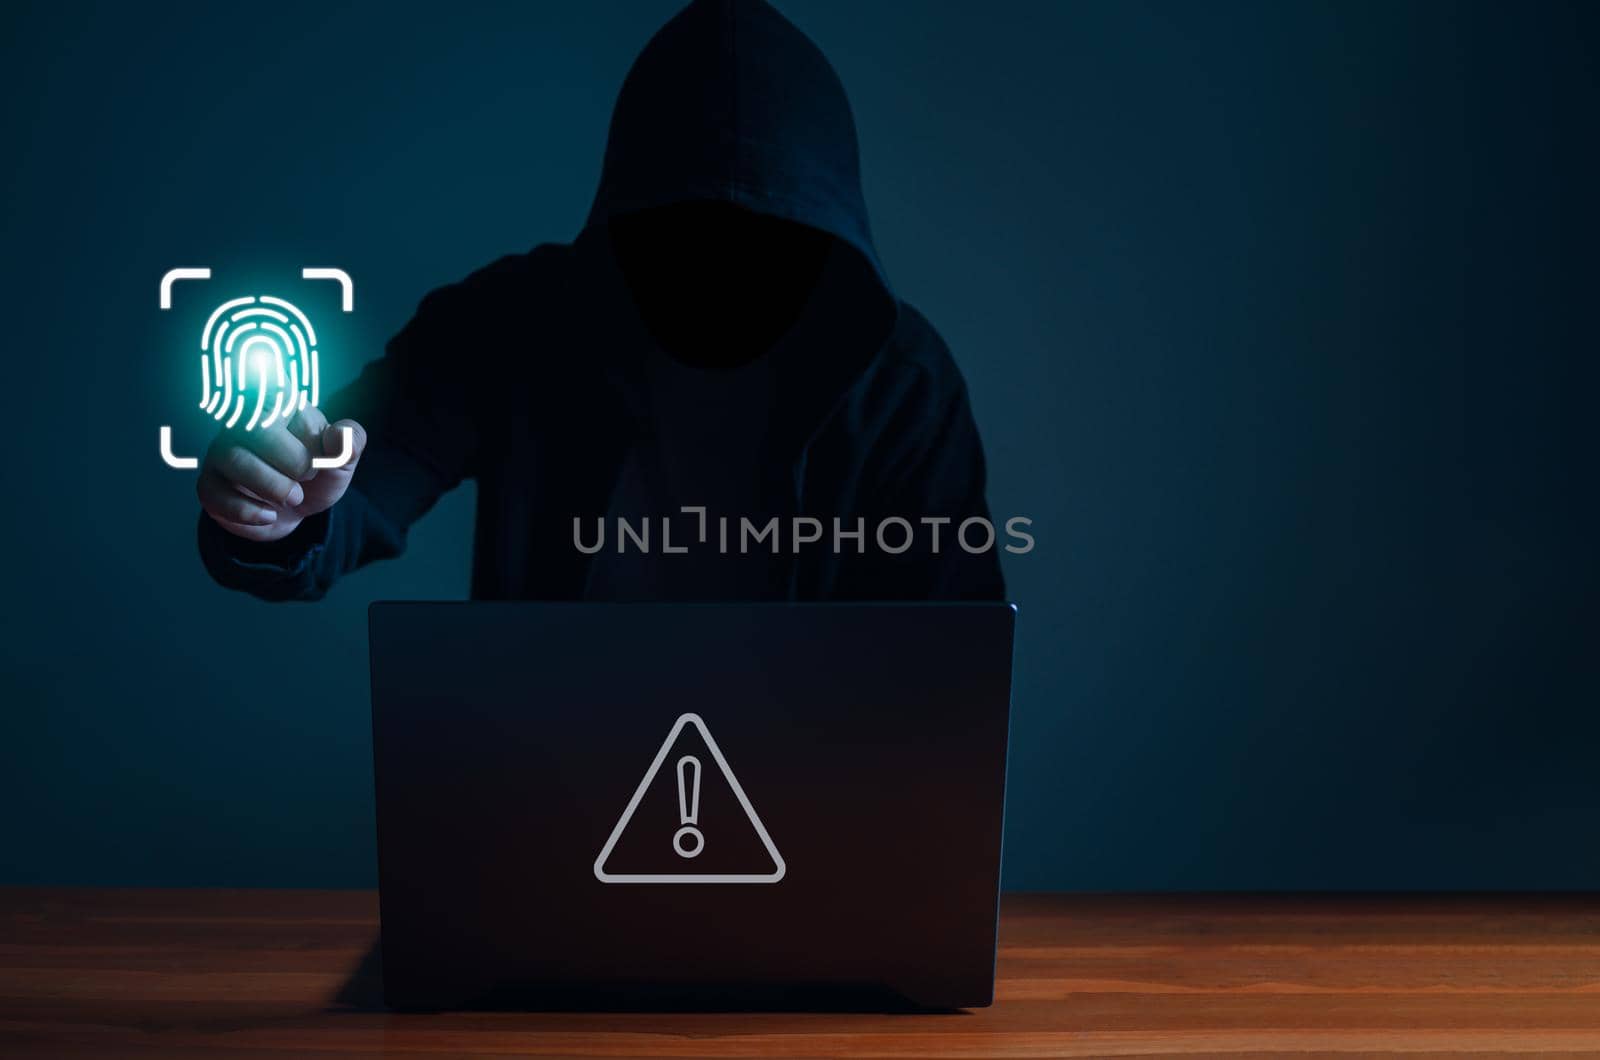 Hackers work on laptops in the dark. The concept of information security in the Internet network and information espionage.